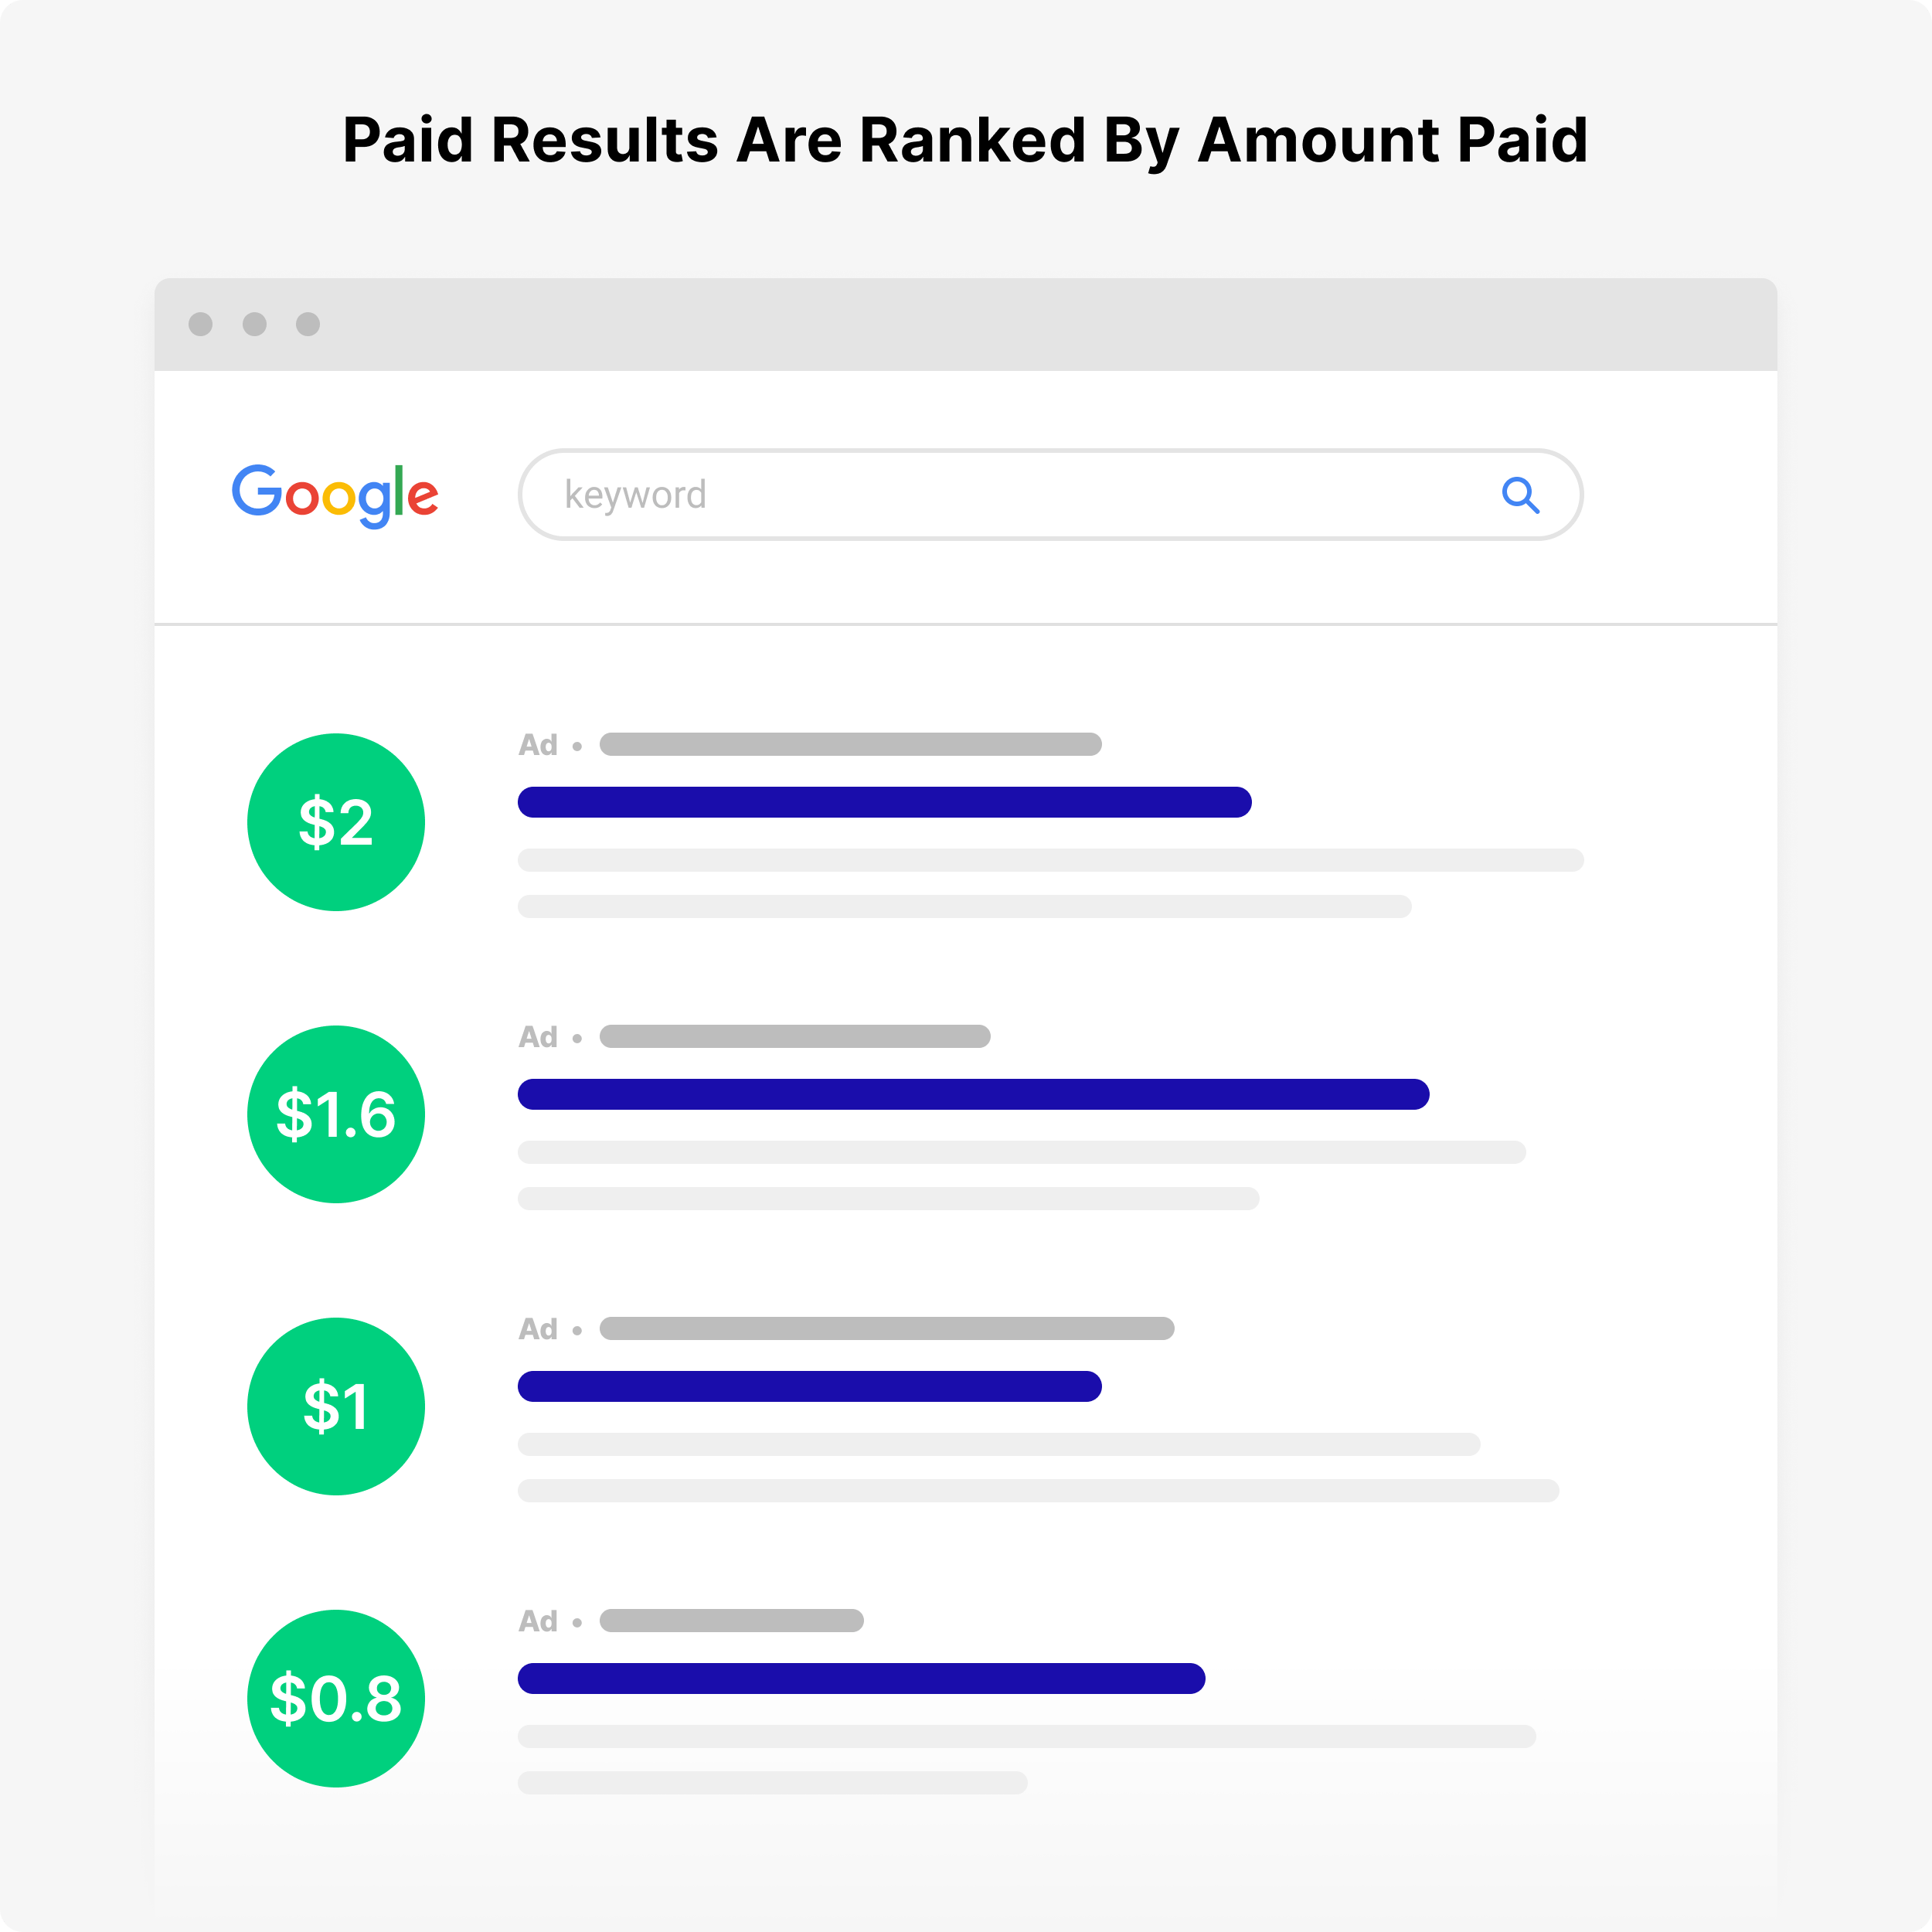 Paid results ranked by amount paid